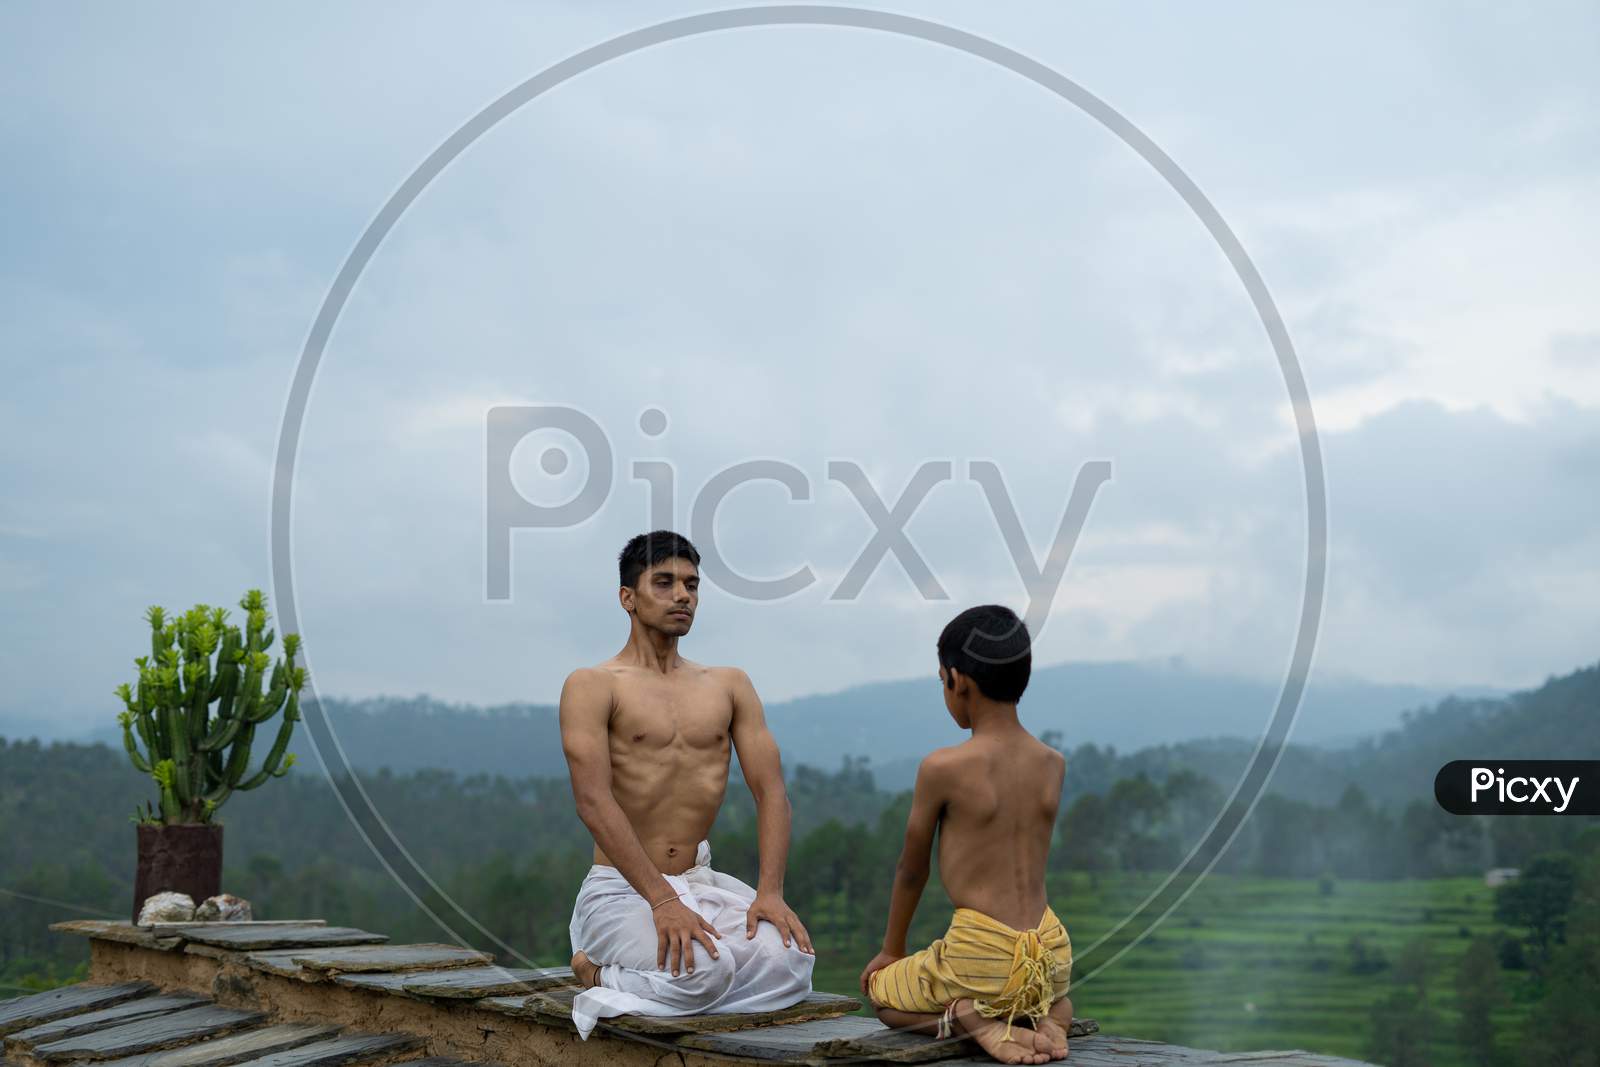 A Young Handsome Boy Doing Yoga With A Kid On The Roof Of A House Situated In The Middle Of Mountain Range. Yoga And Fitness.